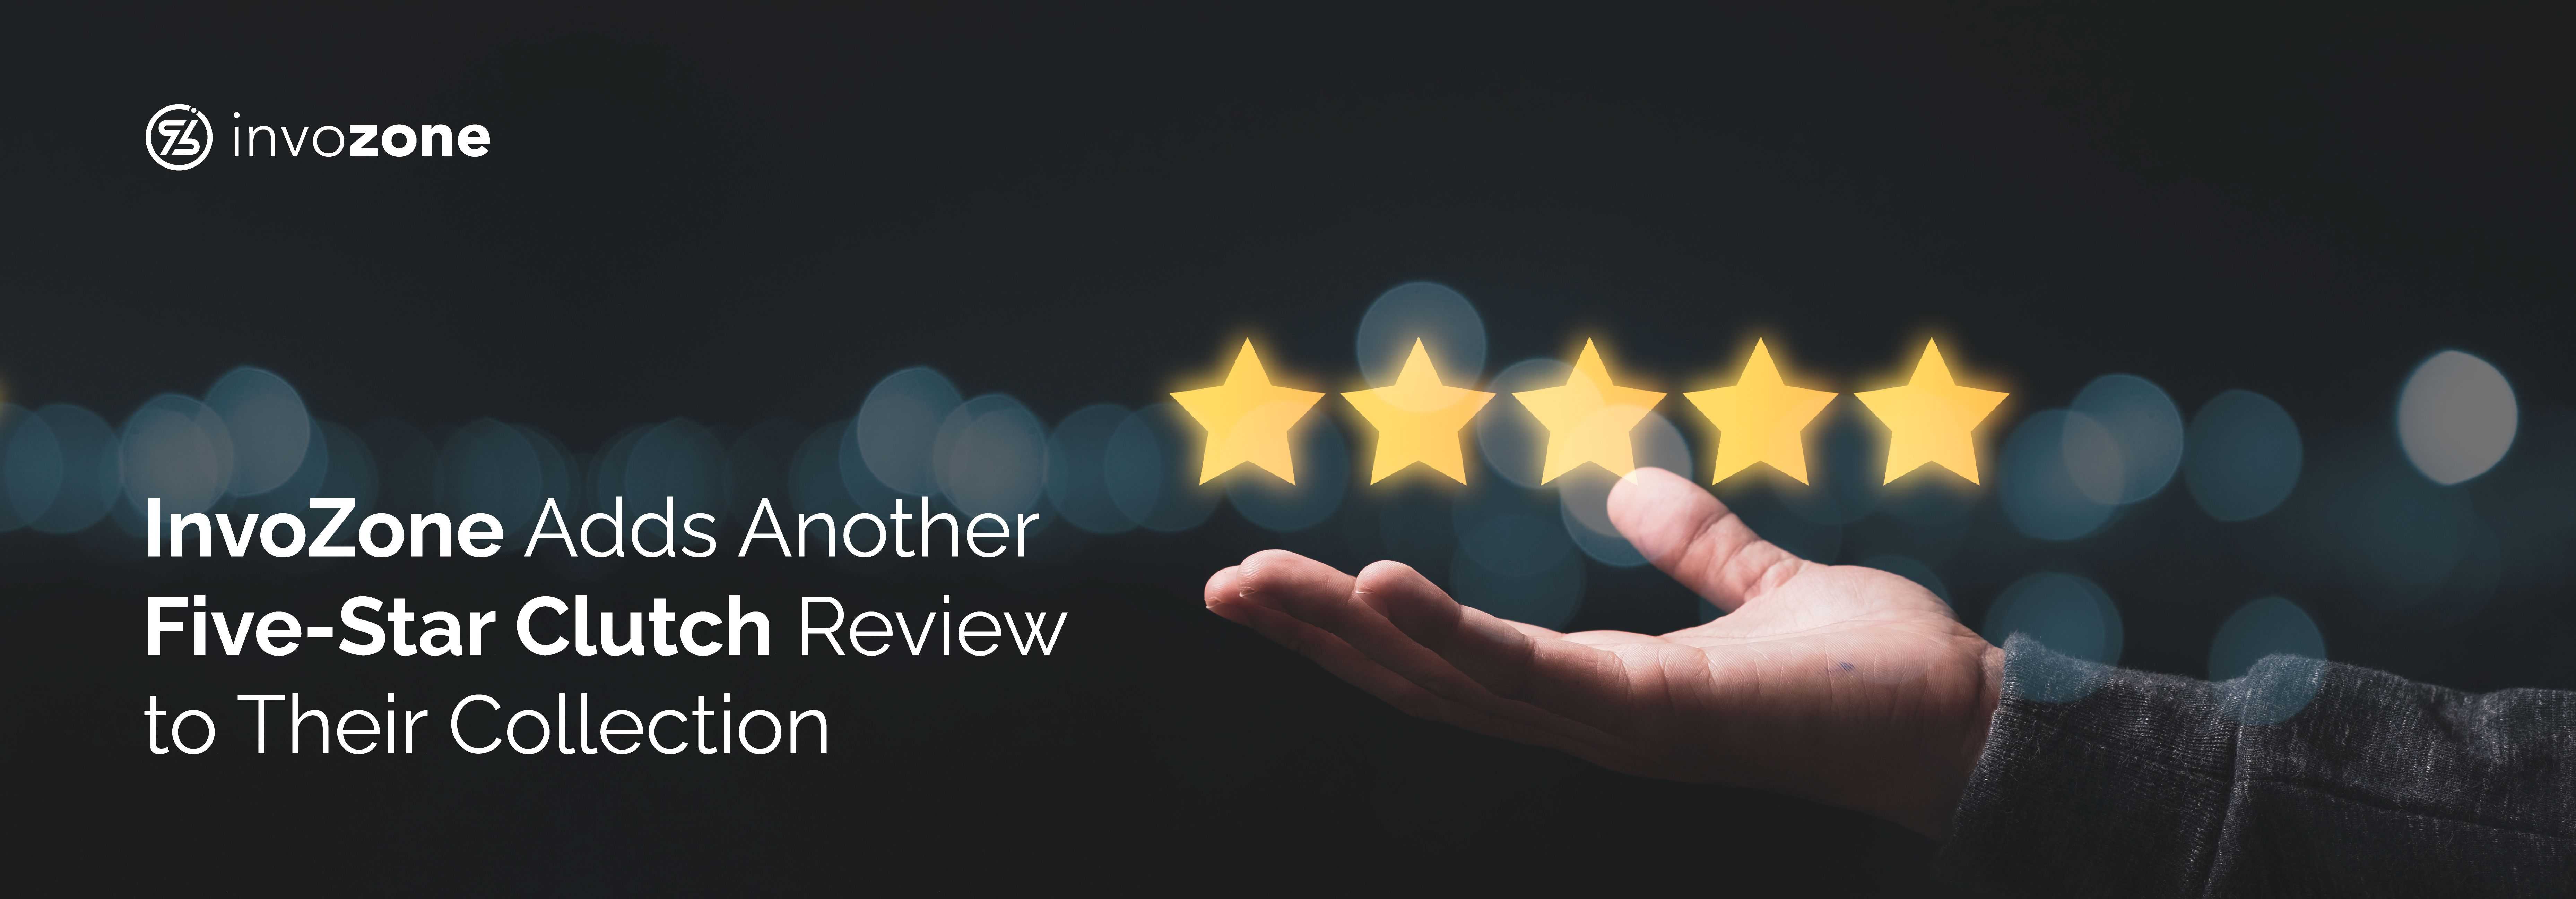 InvoZone Adds Another Five-Star Clutch Review to Their Collection